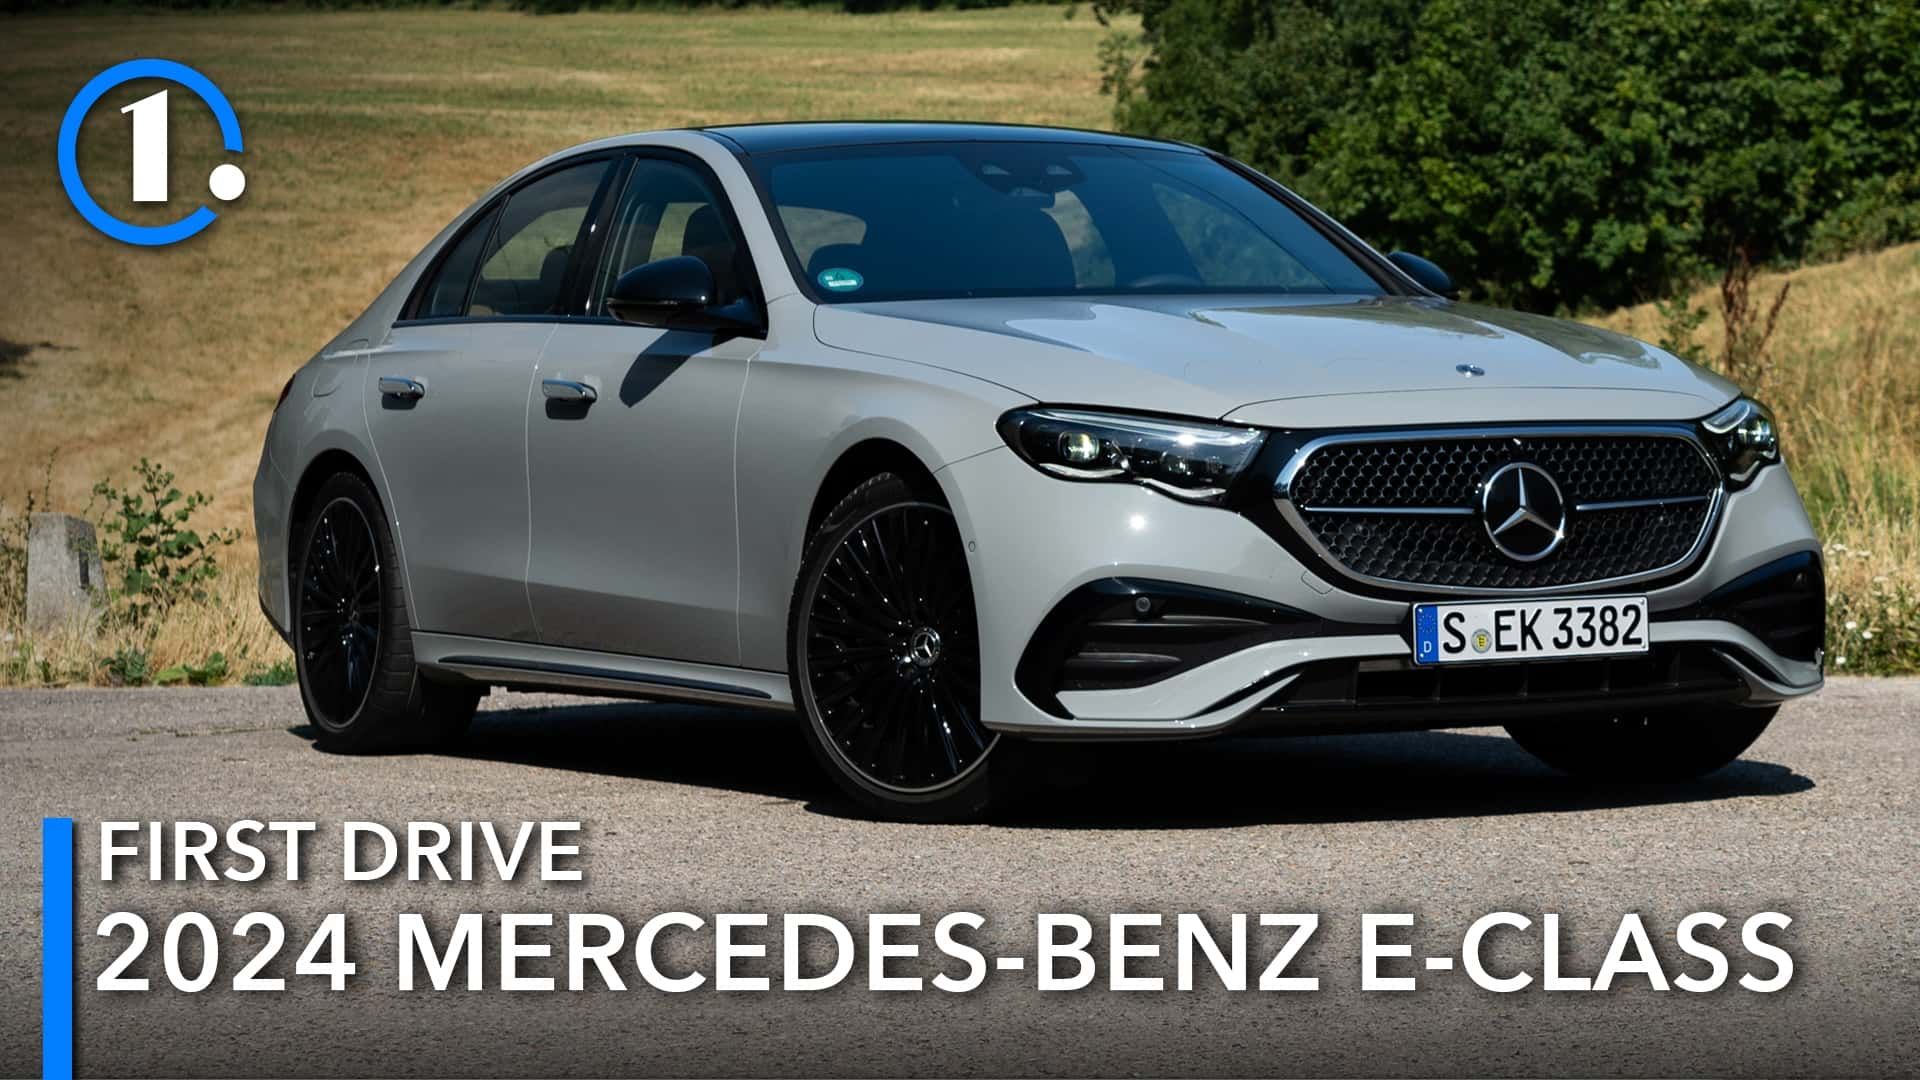 2024 Mercedes-Benz E-Class learns from the past, looks to the